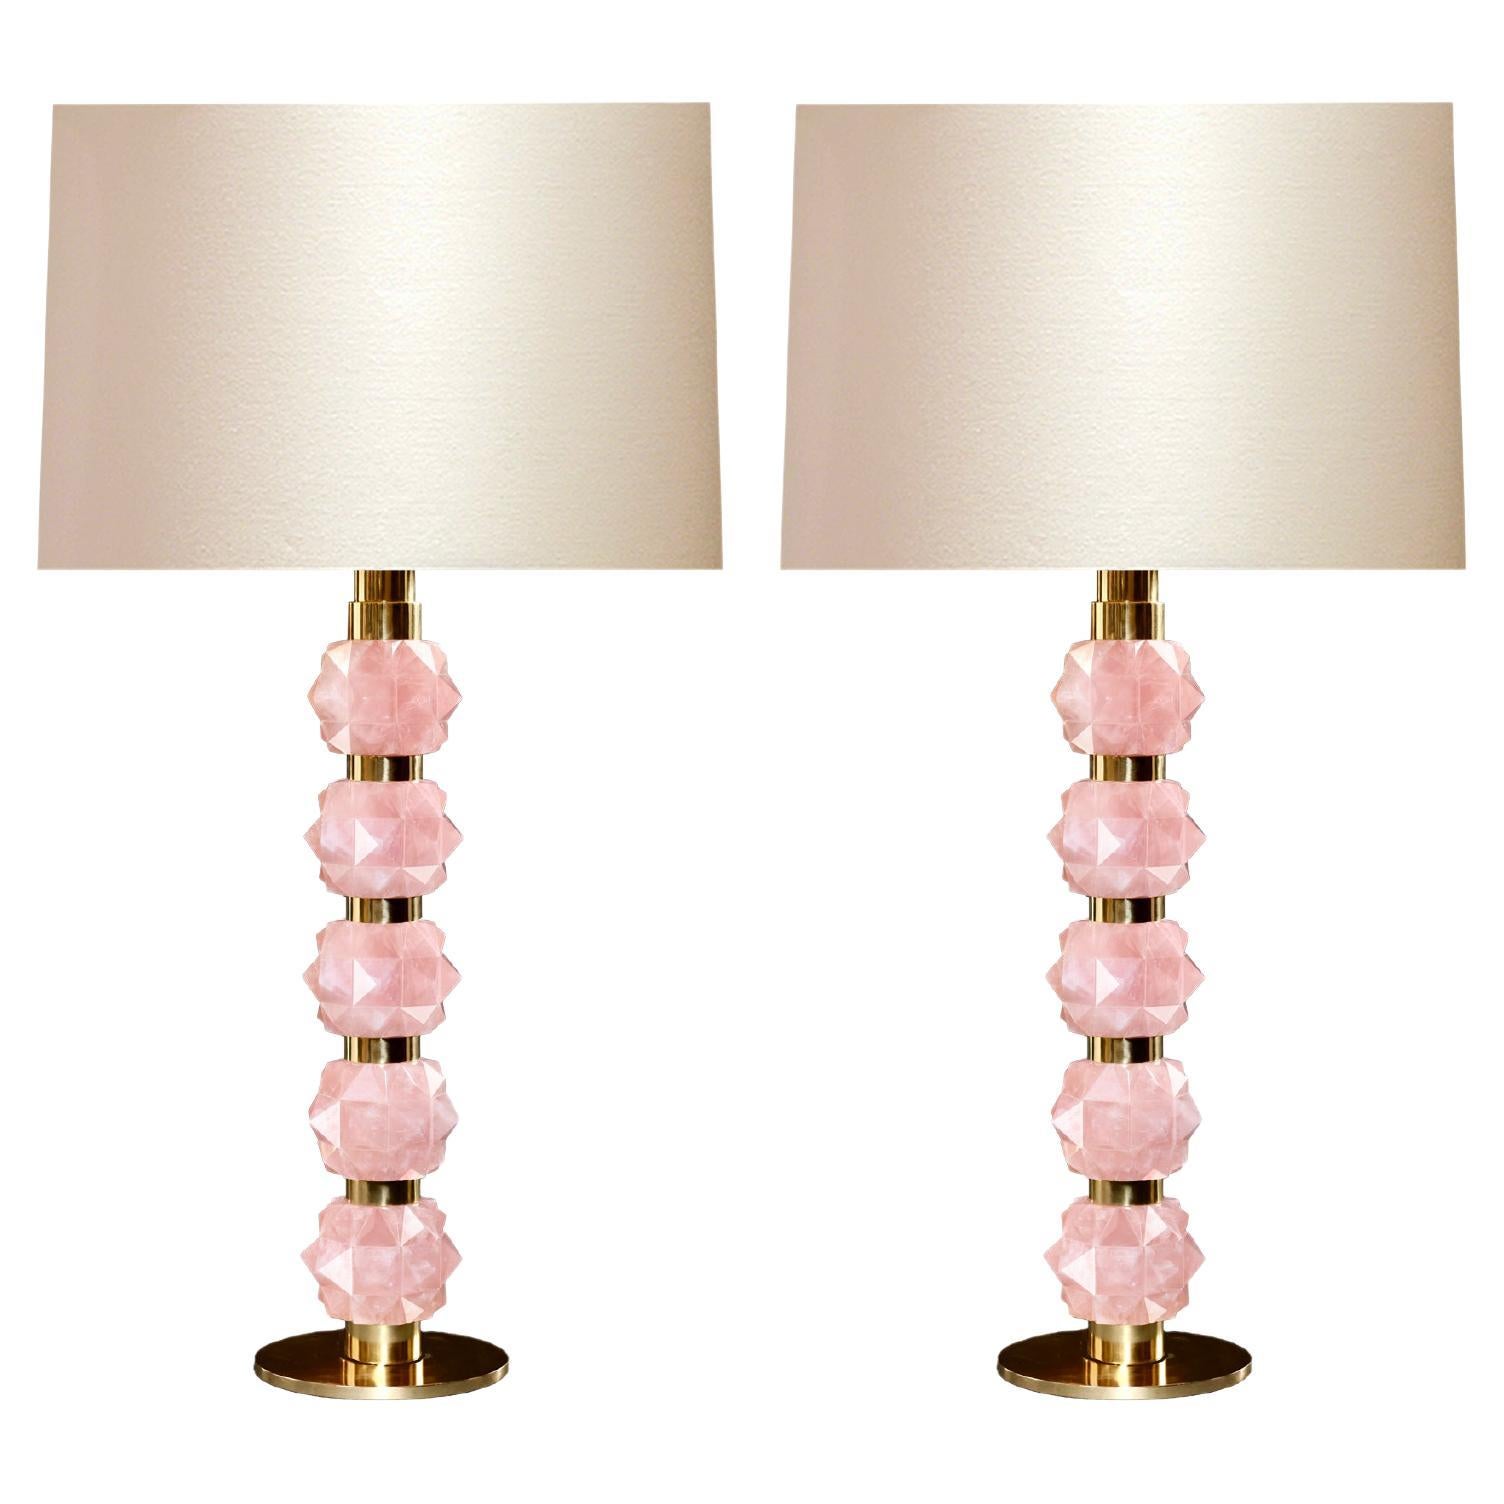 Candy IV Lamps by Phoenix For Sale